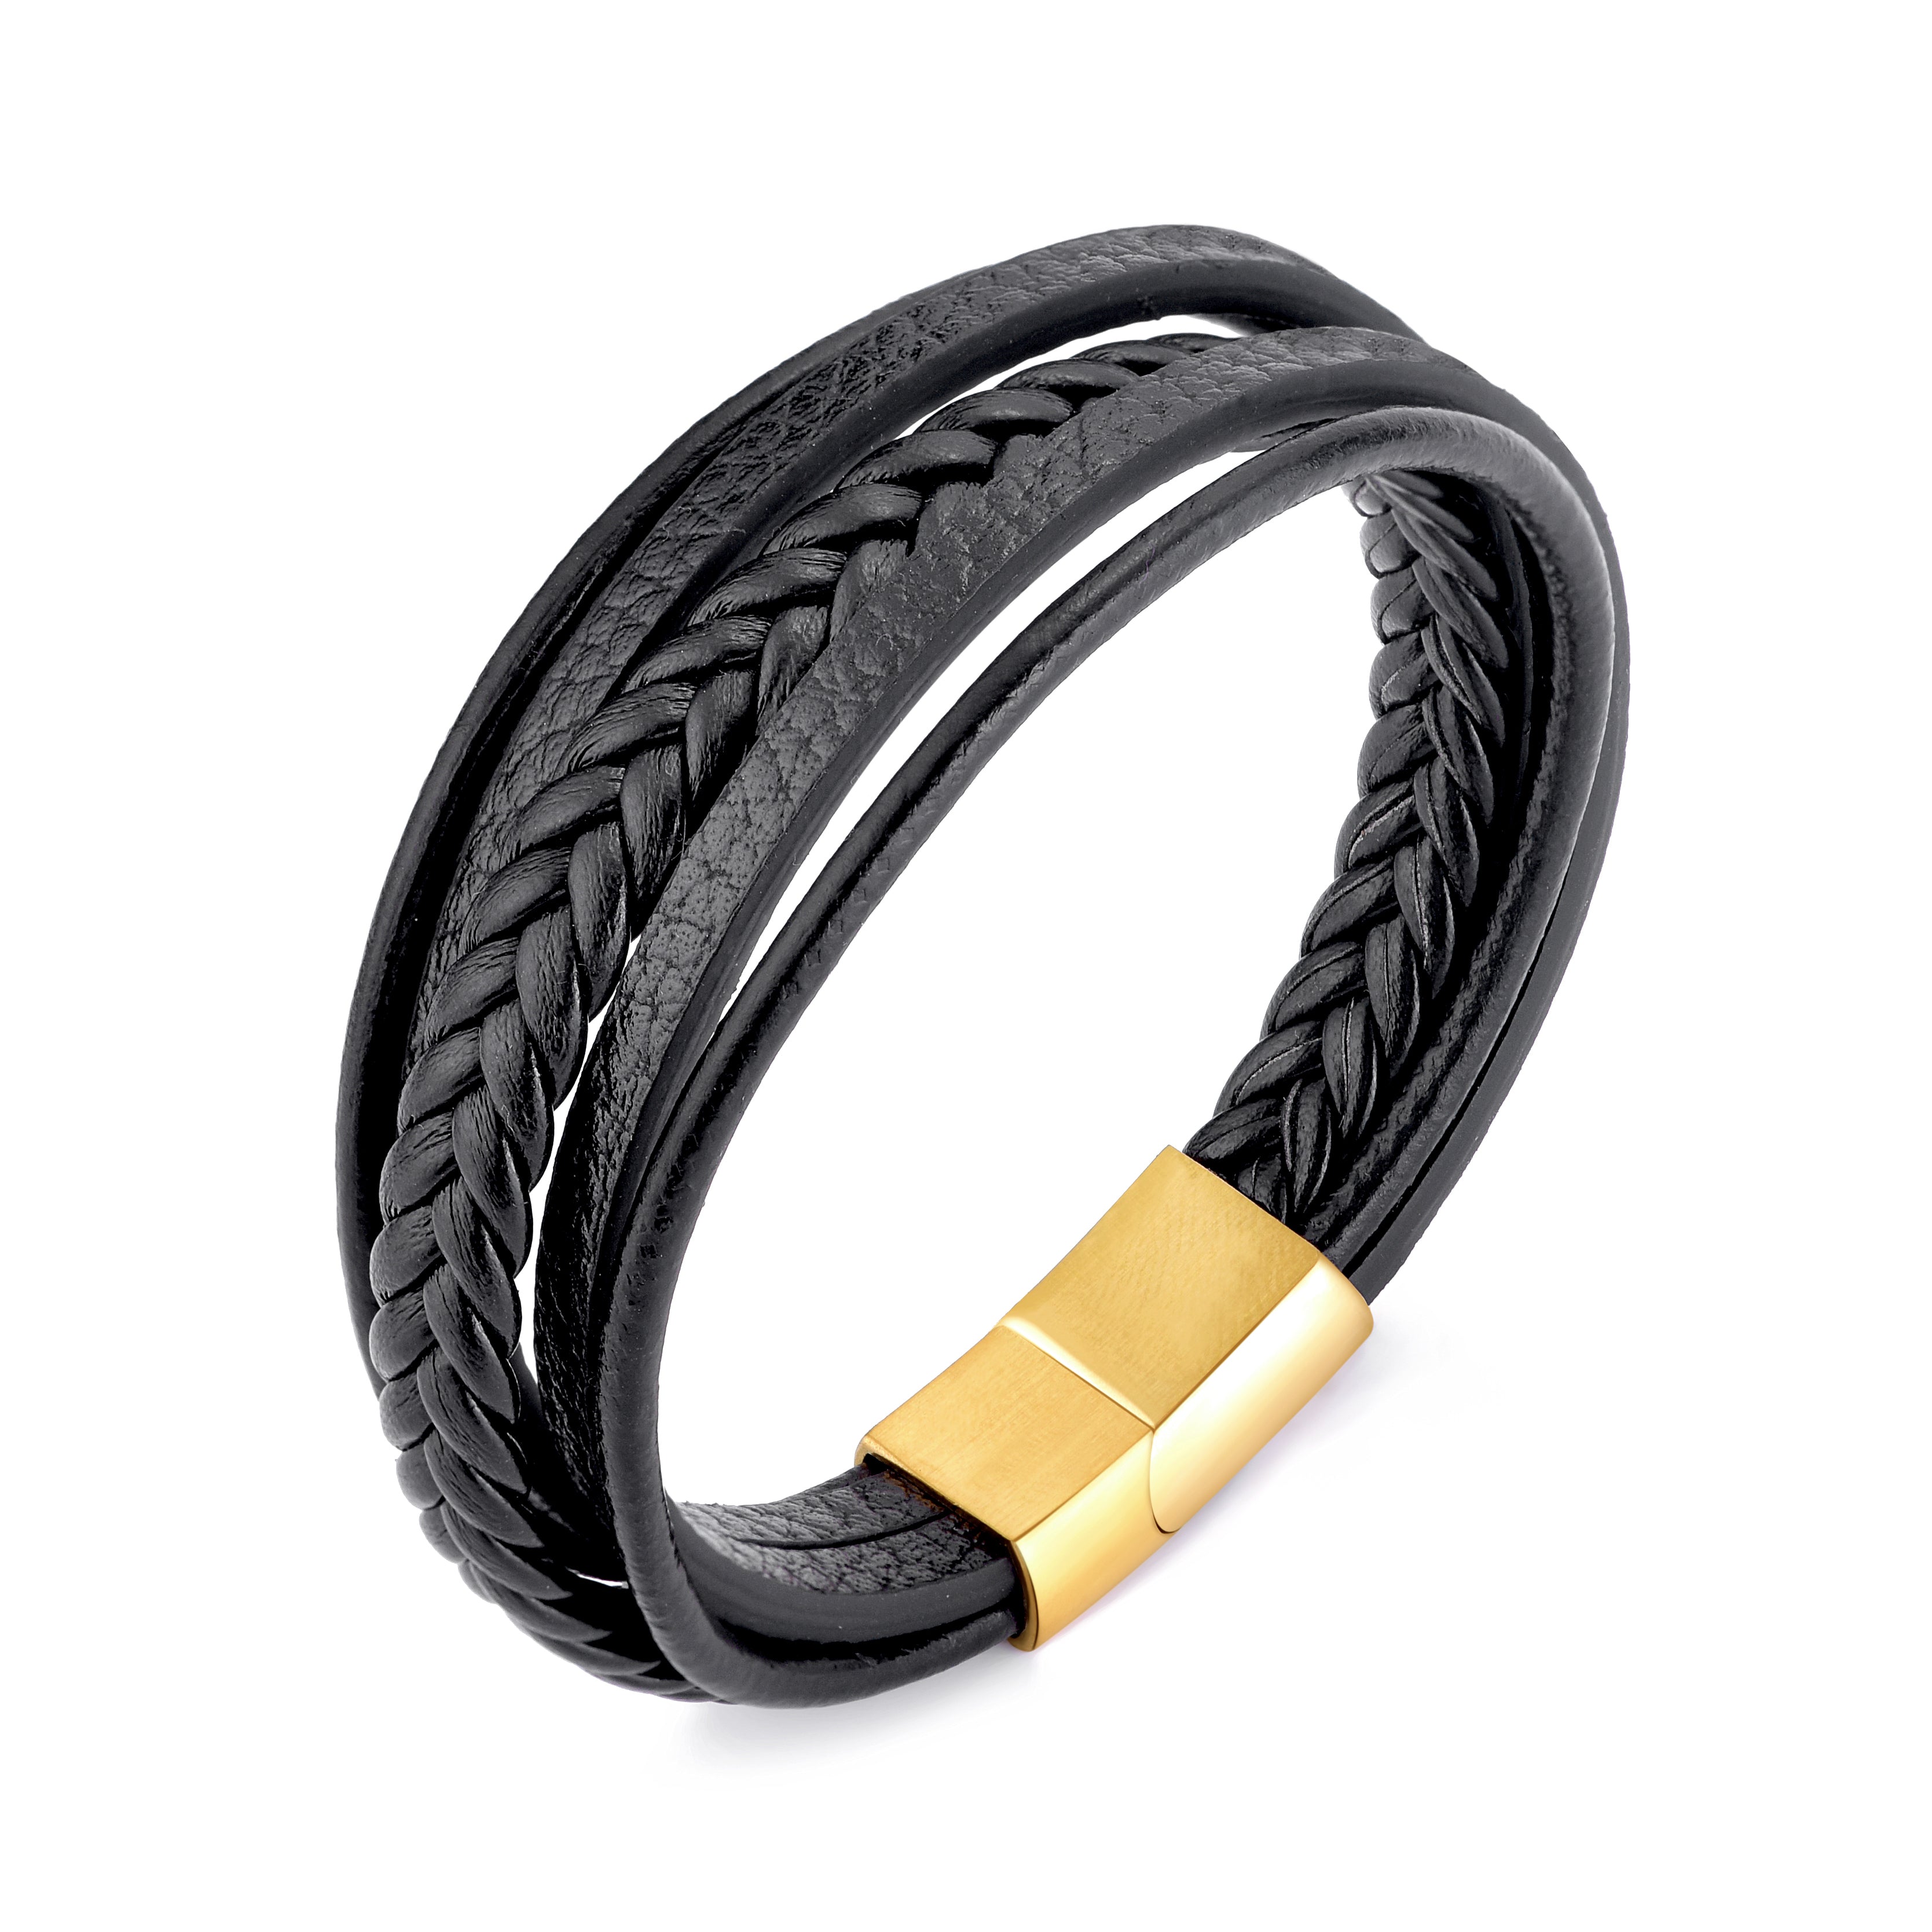 Men's Genuine Black Leather Bracelet with Gold Plated Stainless Steel Clasp by Philip Jones Jewellery